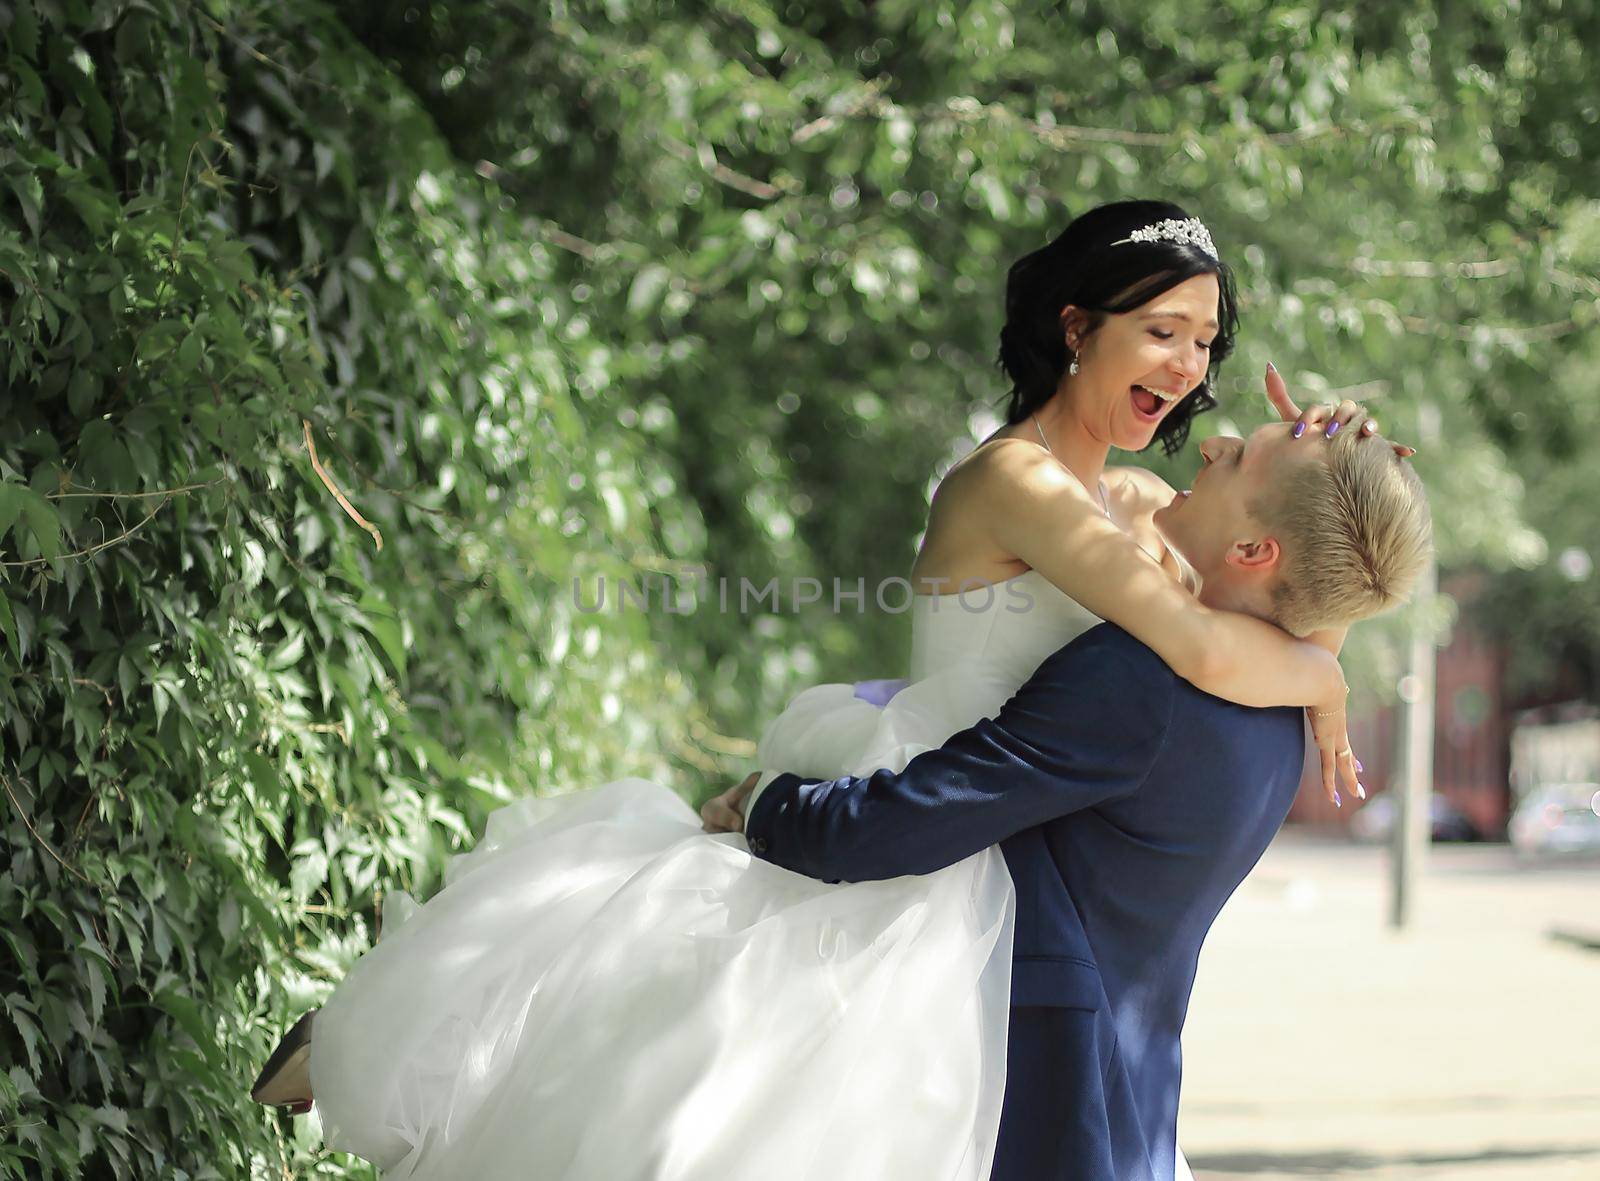 funny bride and groom embracing on the street by SmartPhotoLab